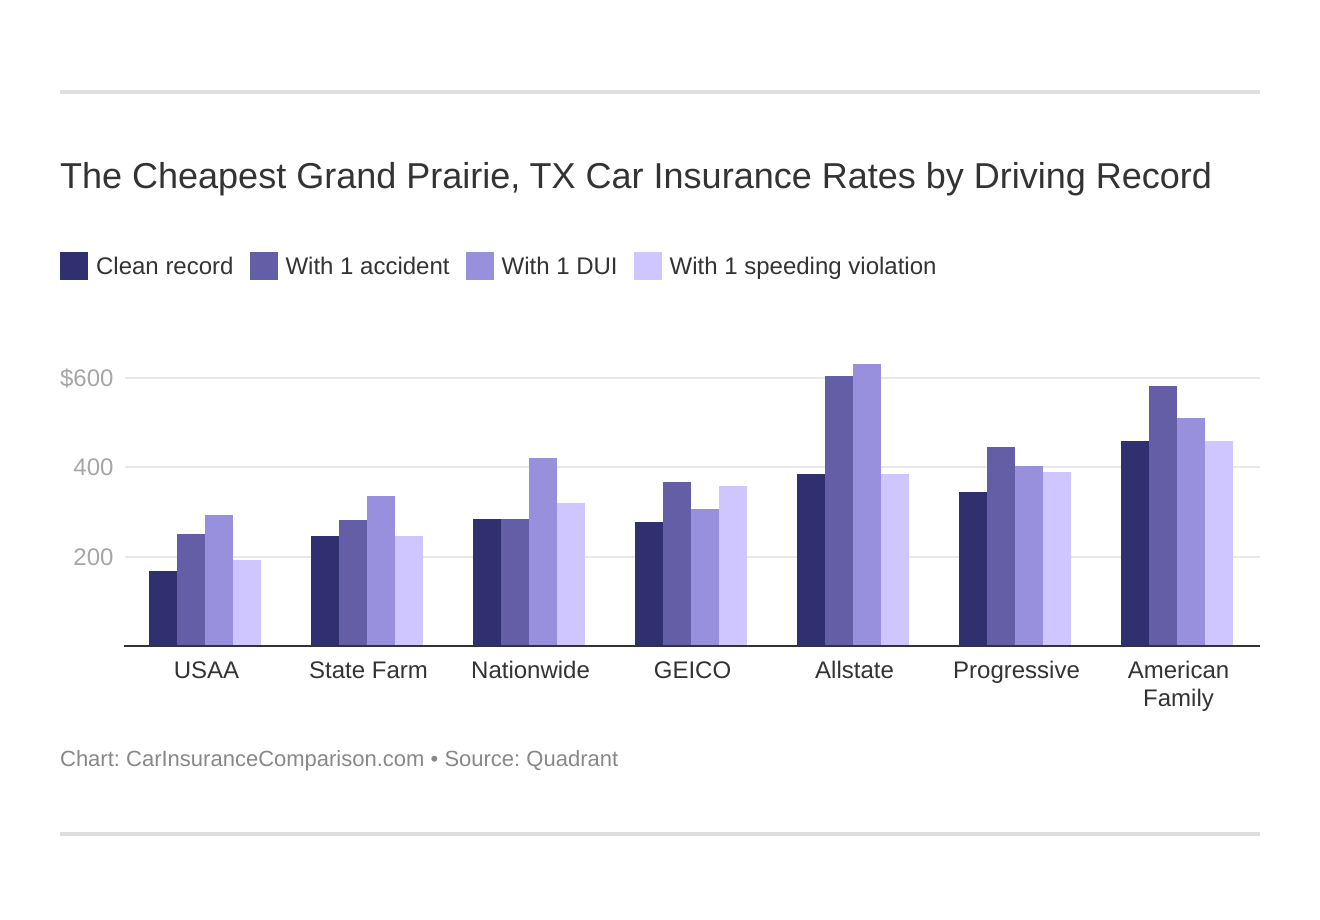 The Cheapest Grand Prairie, TX Car Insurance Rates by Driving Record